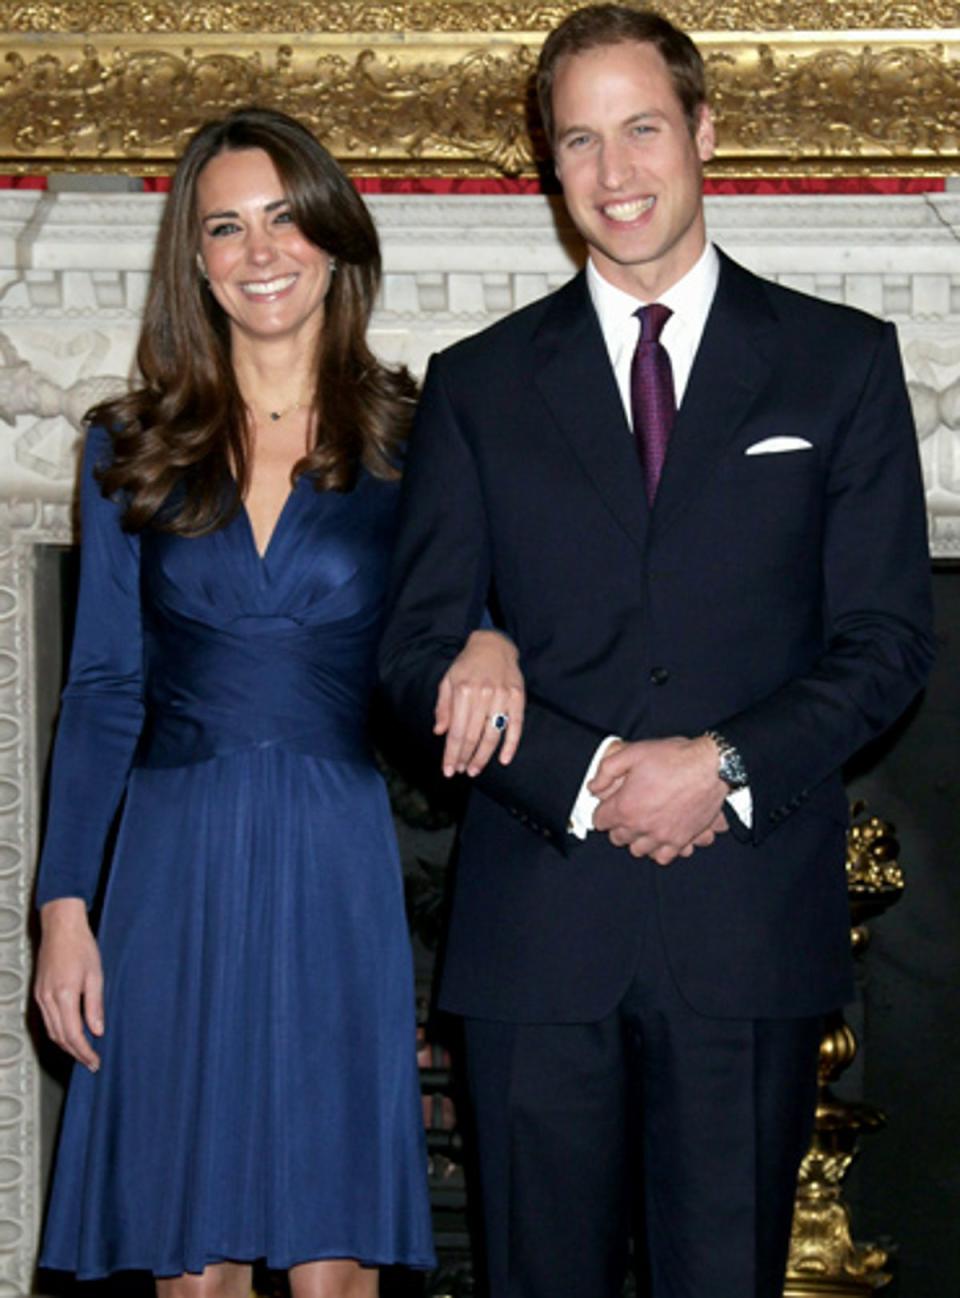 Kate Middleton and Prince William announce their engagement